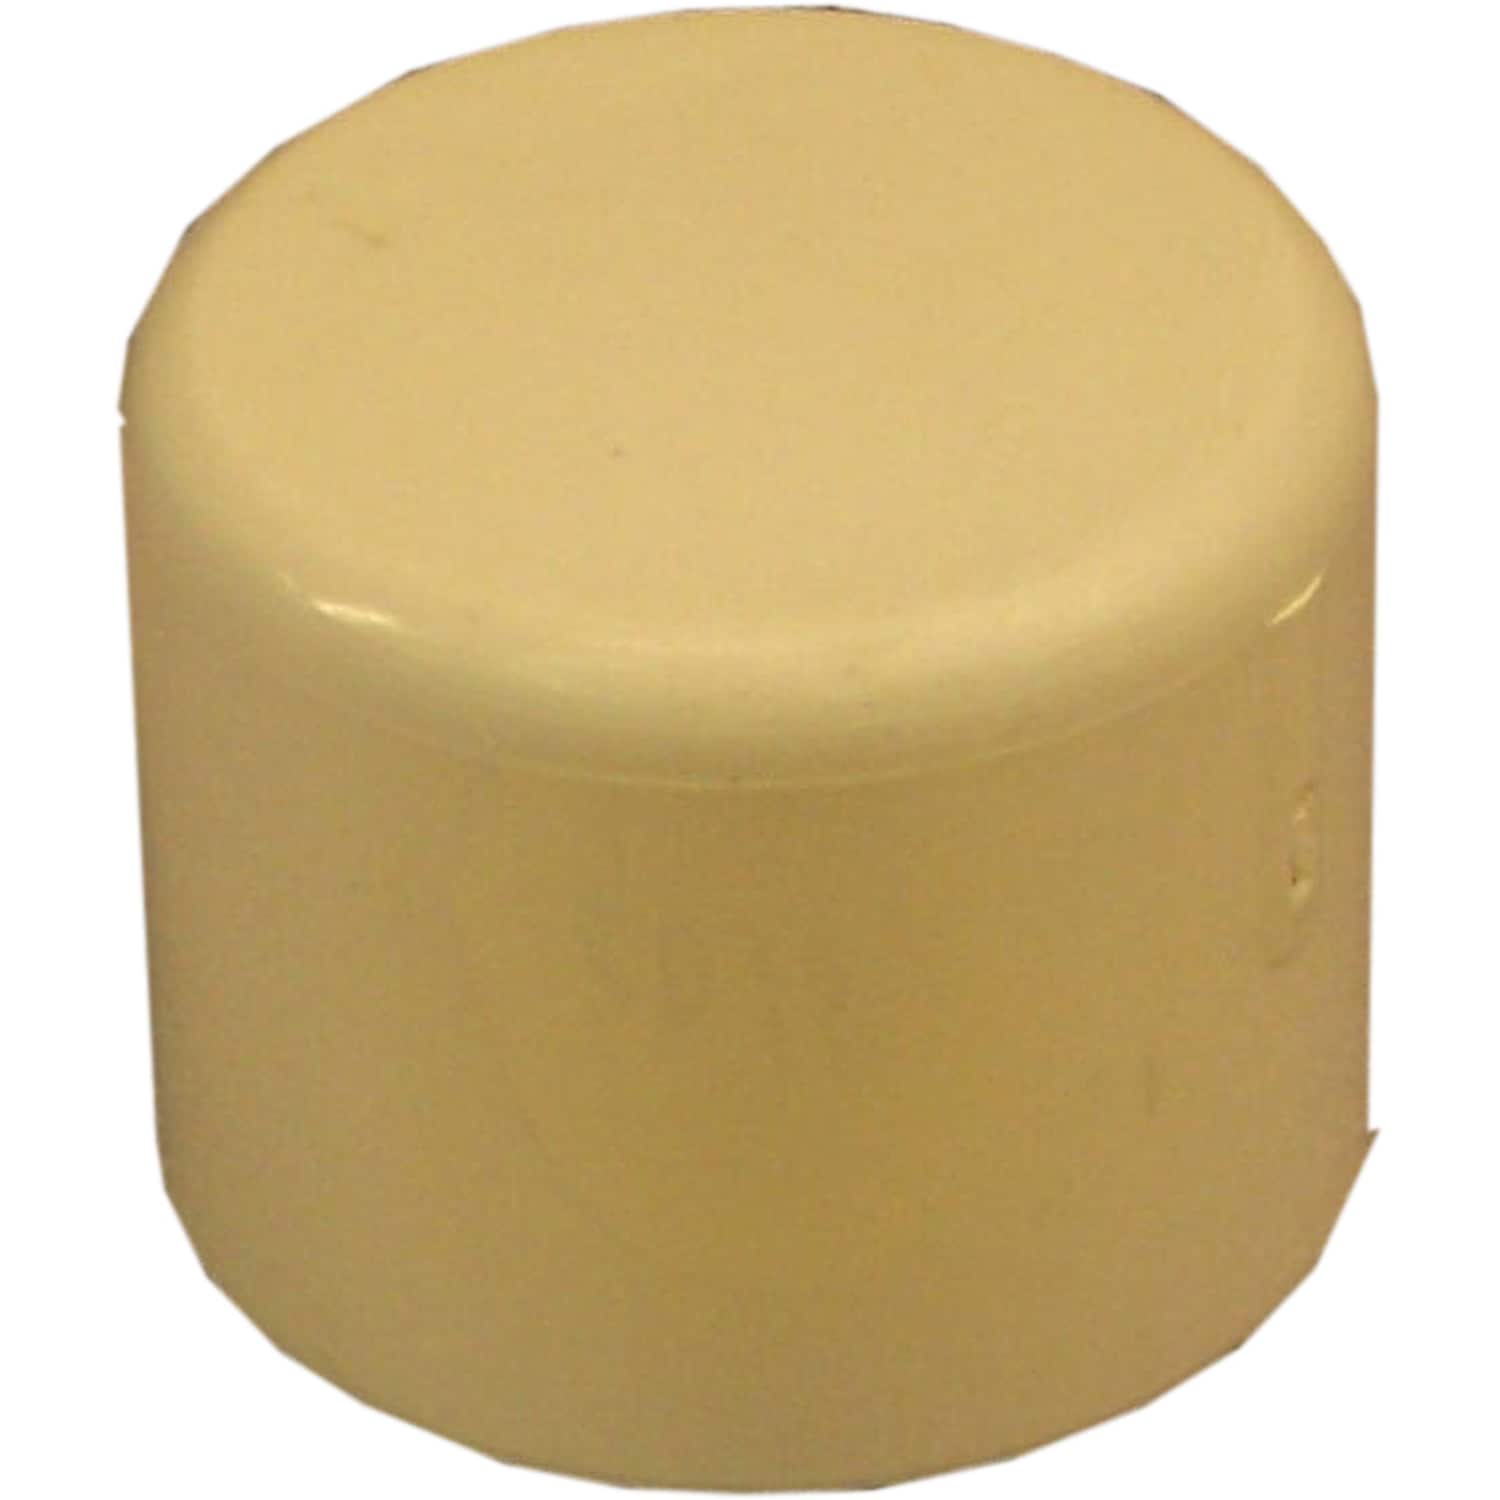 1/2-in CPVC Cap (10-Pack) | Solvent Weld Installation | NSF Safety Listed | ASTM D2846 Approved | Contractor Pack of 10 | - Genova 155544